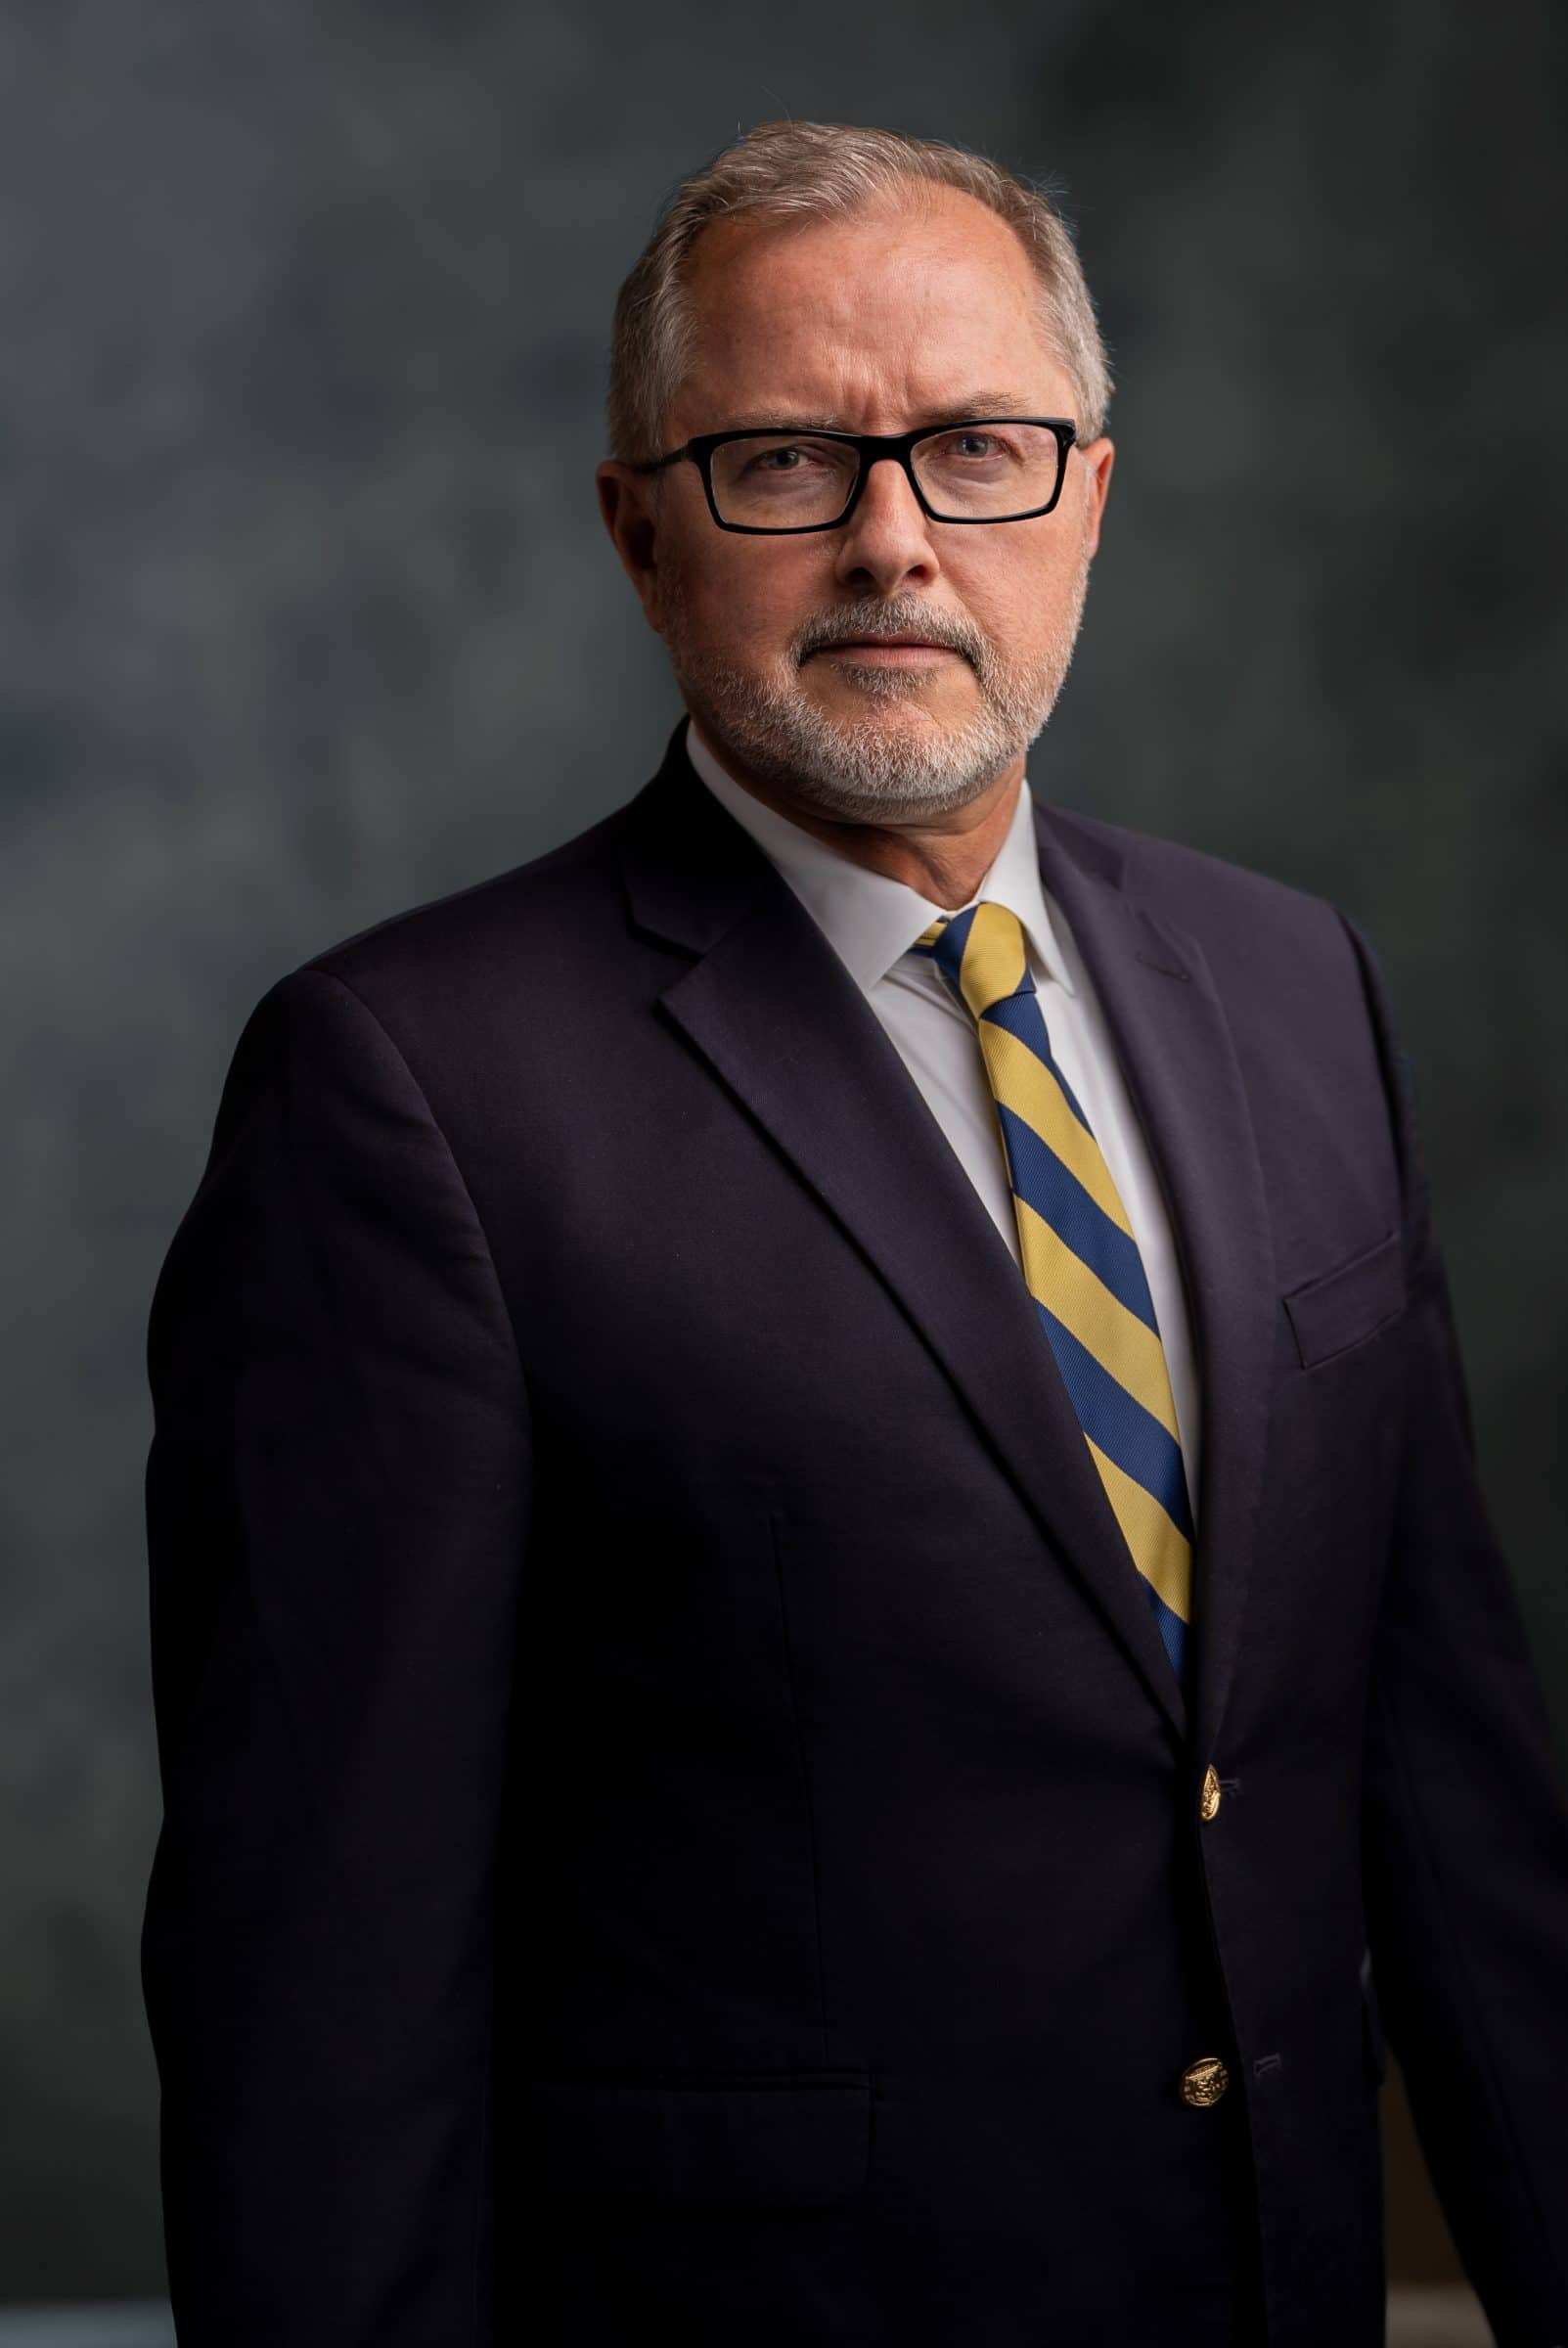 Headshot of Dean of the Honors College and an Associate Professor of English, Kevin Gustafson.